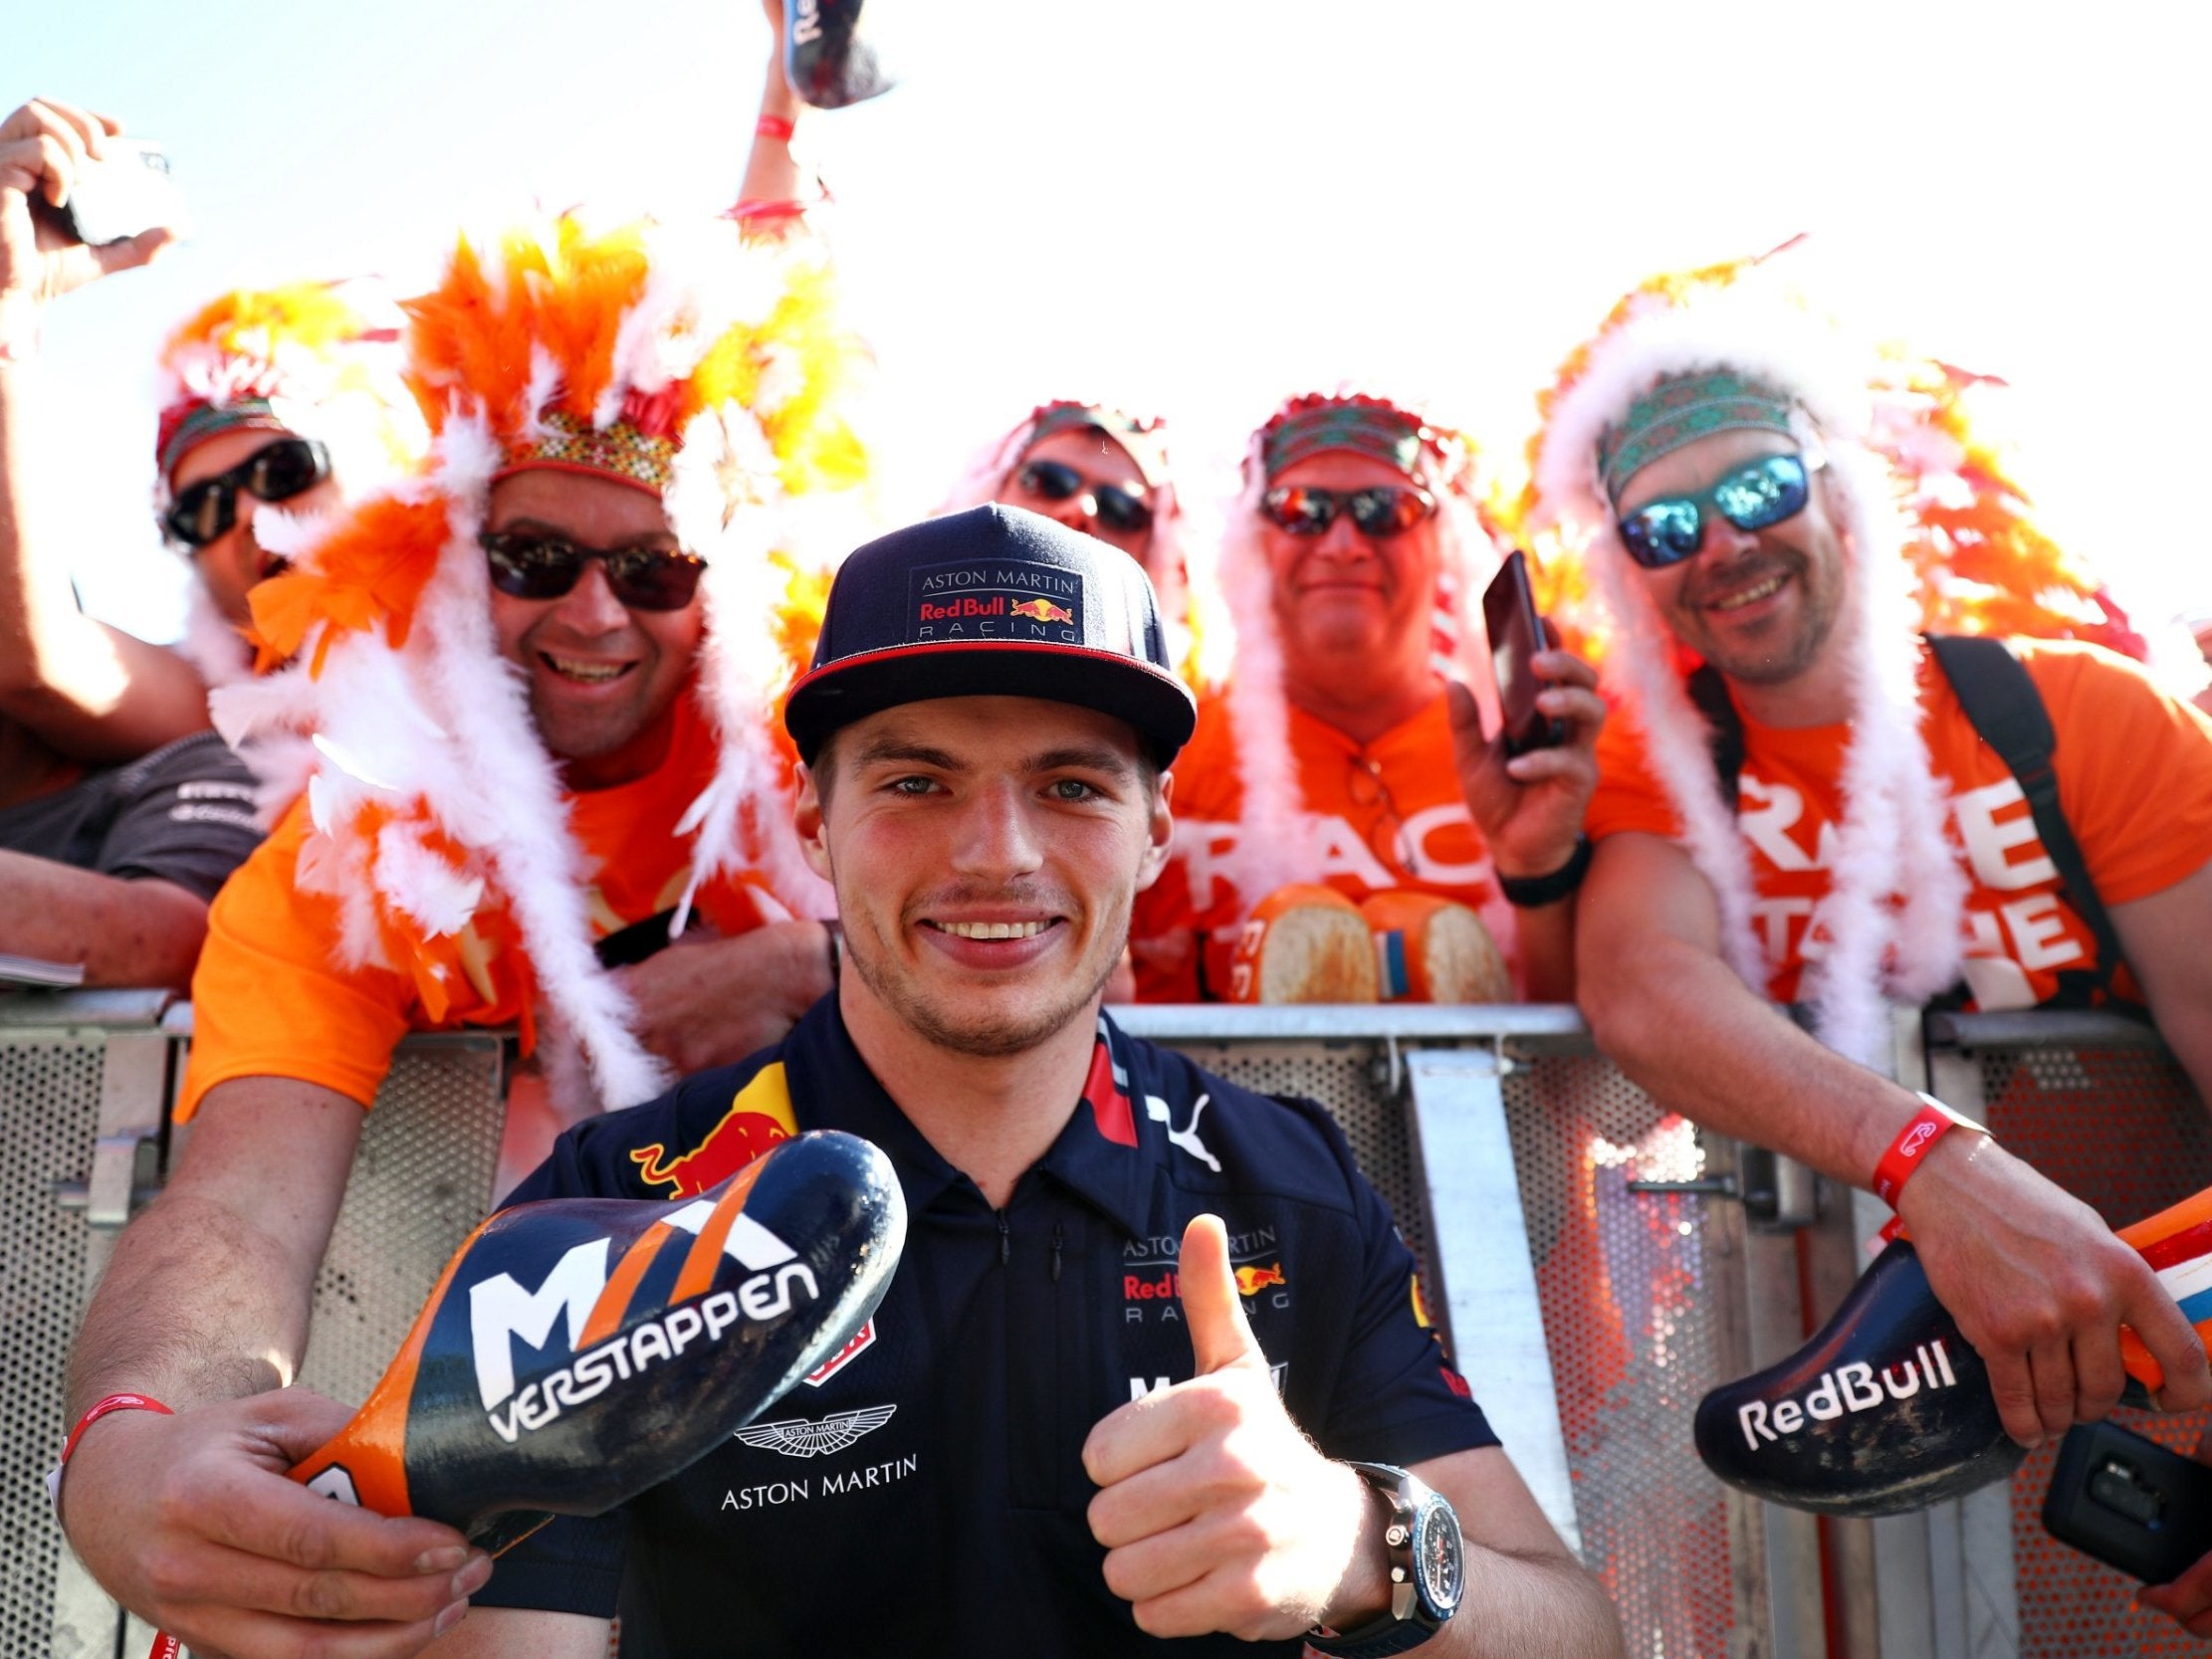 Liberty Media are looking to capitalise on the influx of Max Verstappen fans